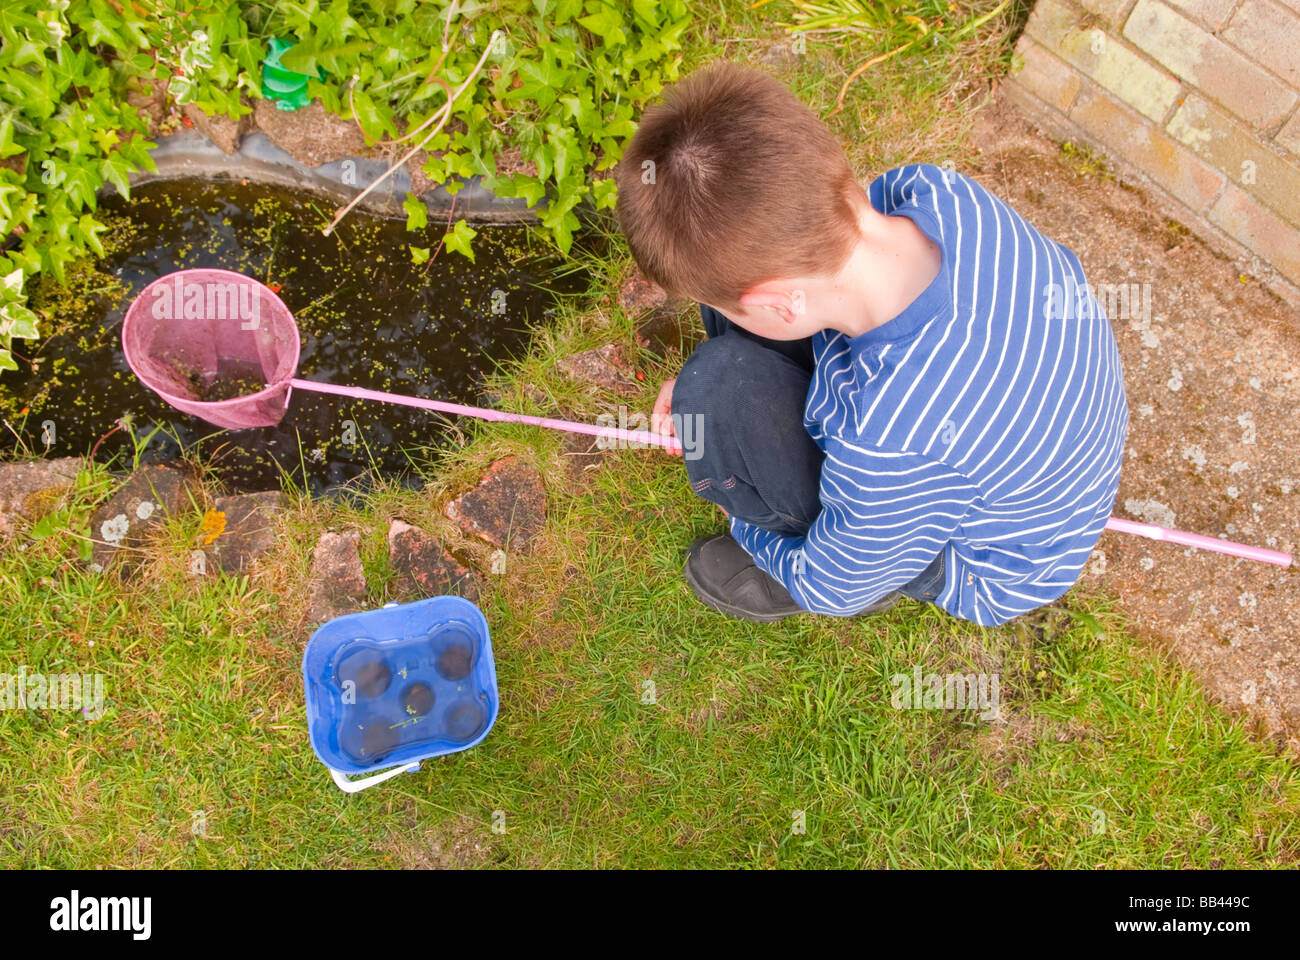 https://c8.alamy.com/comp/BB449C/a-view-looking-down-on-a-young-boy-catching-newts-and-fish-with-his-BB449C.jpg